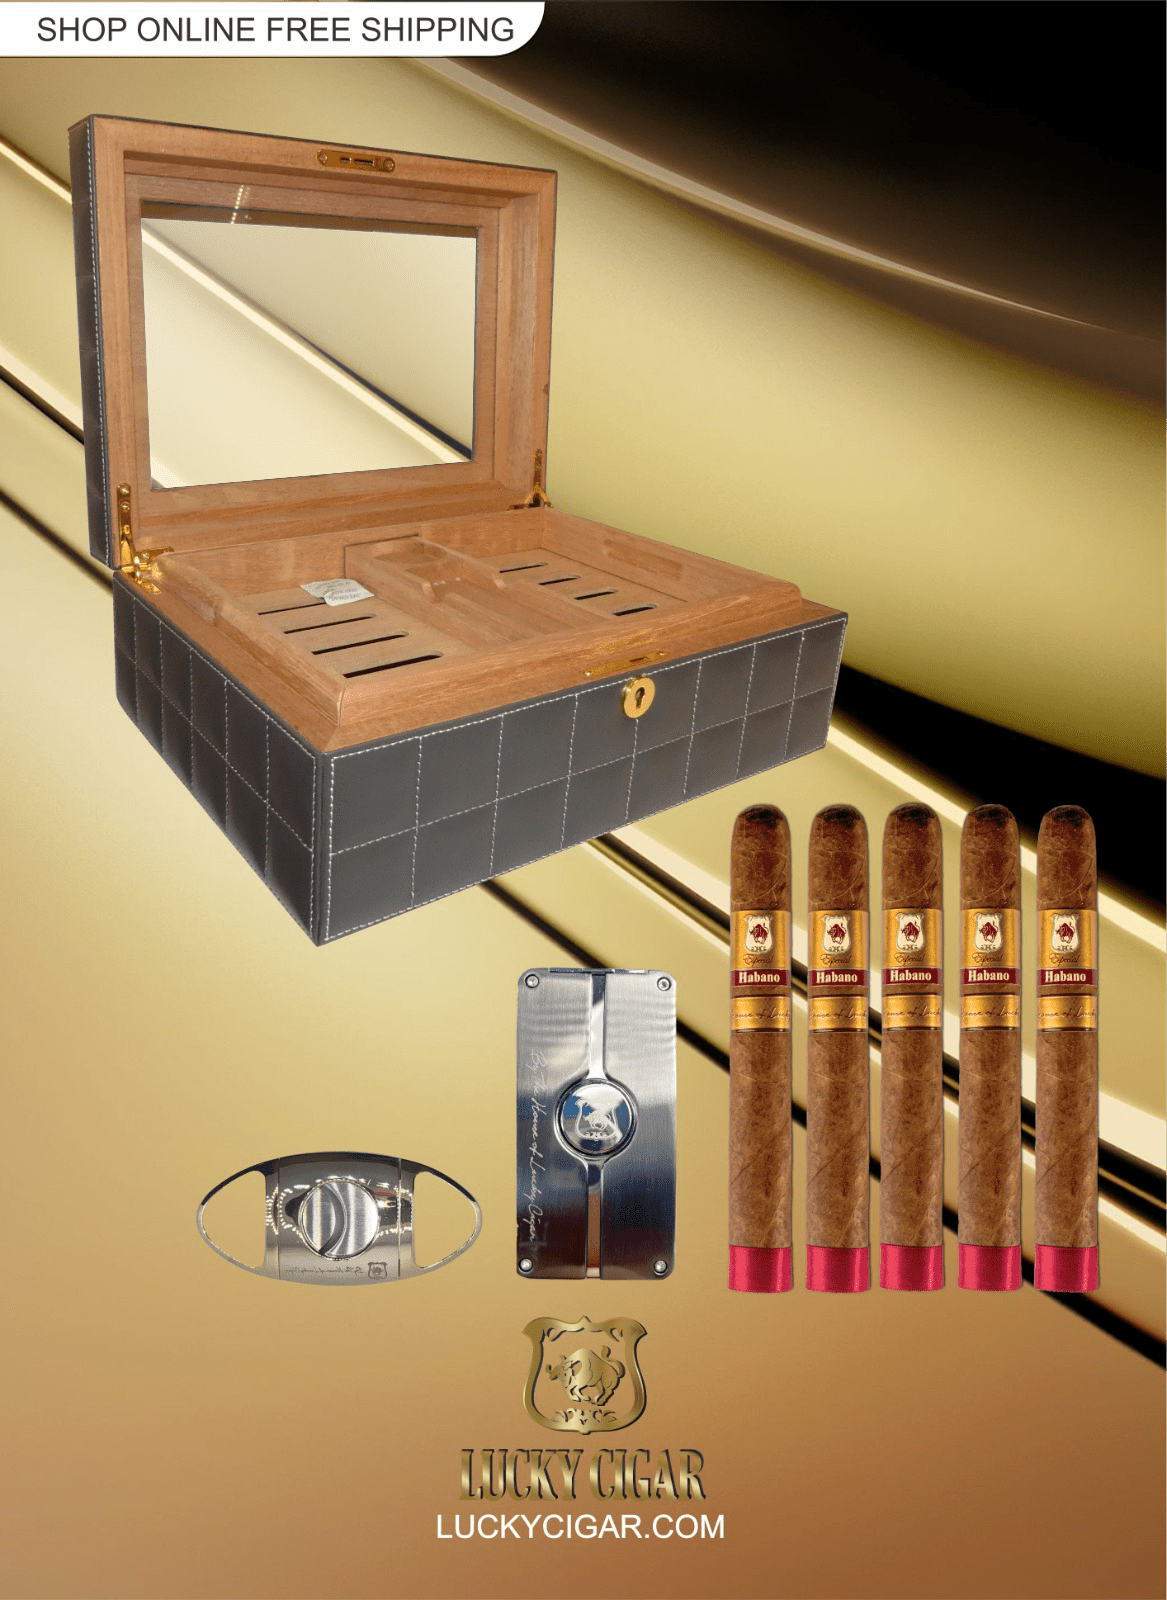 Lucky Cigar Sampler Sets: Set of 5 Especial Habano Toro Cigars with Torch, Cutter